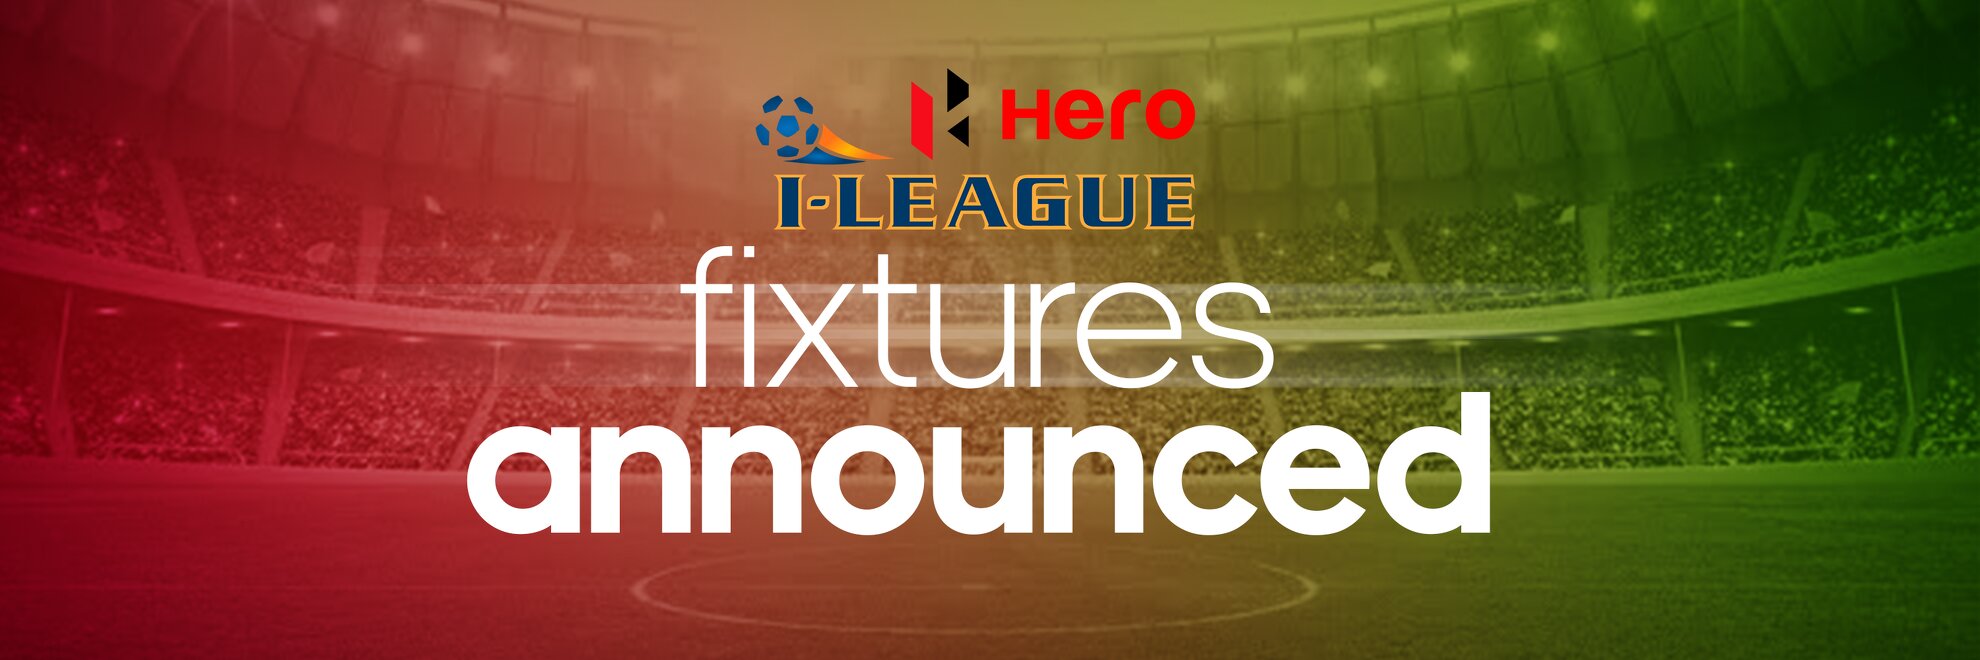 I-League 2019-20: Fixtures and Stadiums